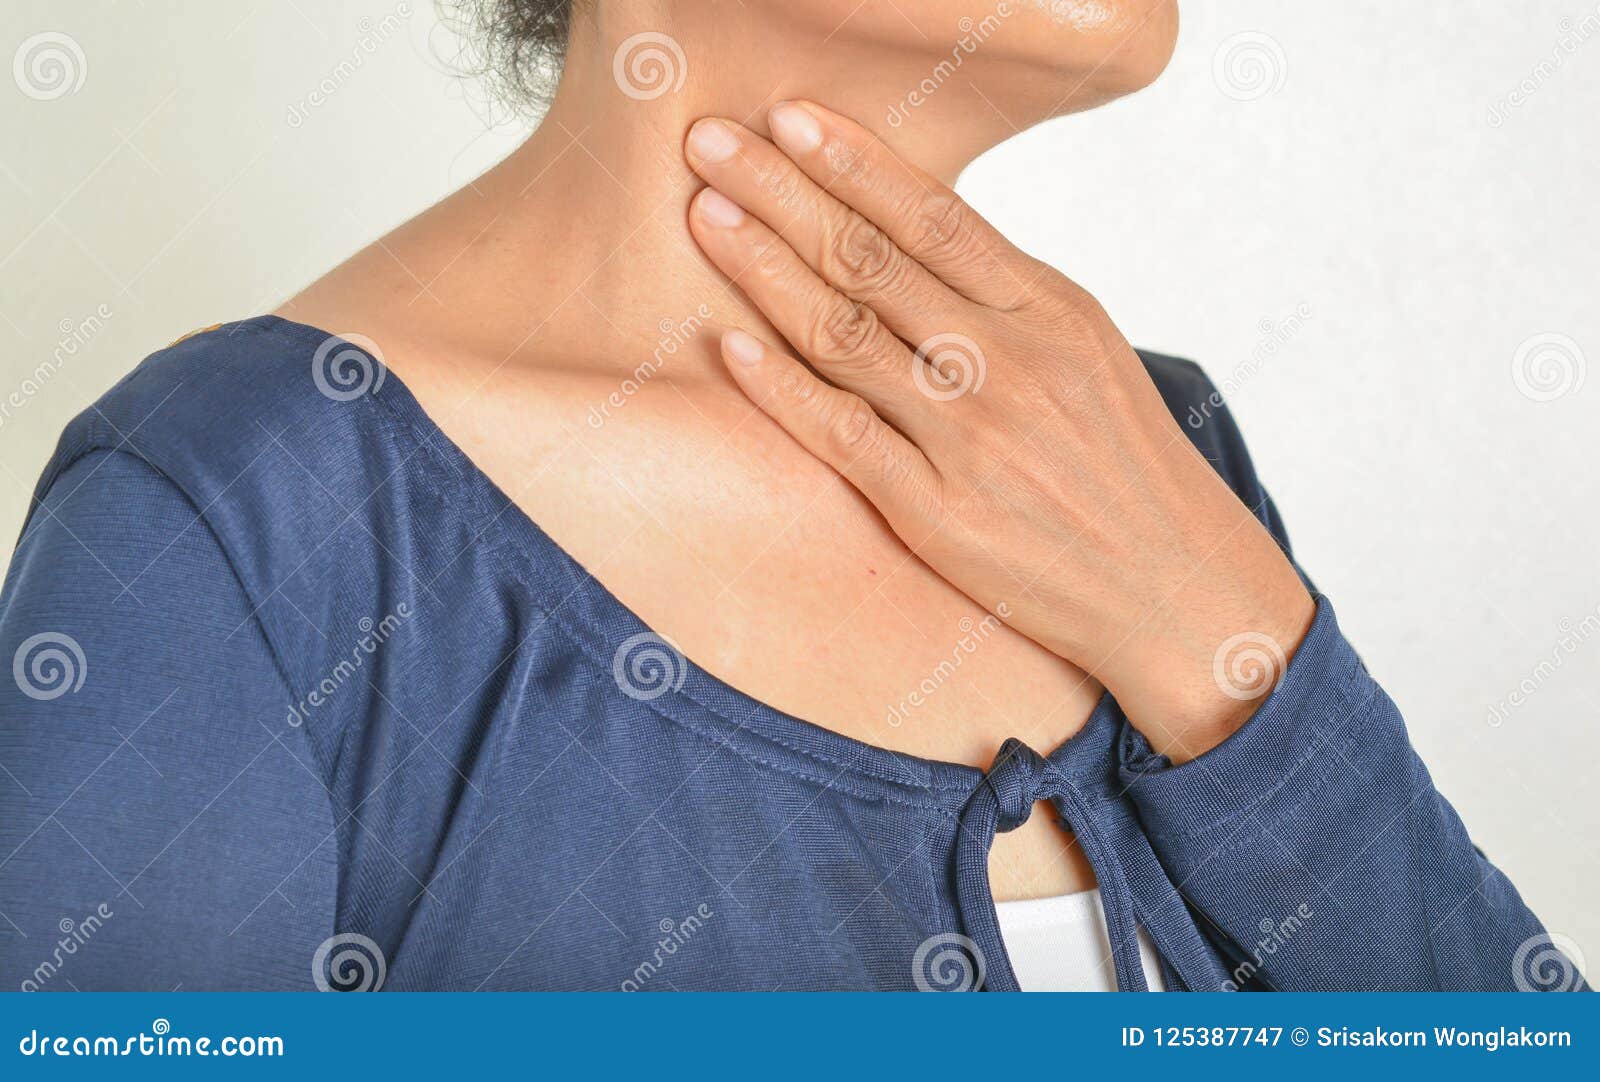 tonsillitis infections in the neck,